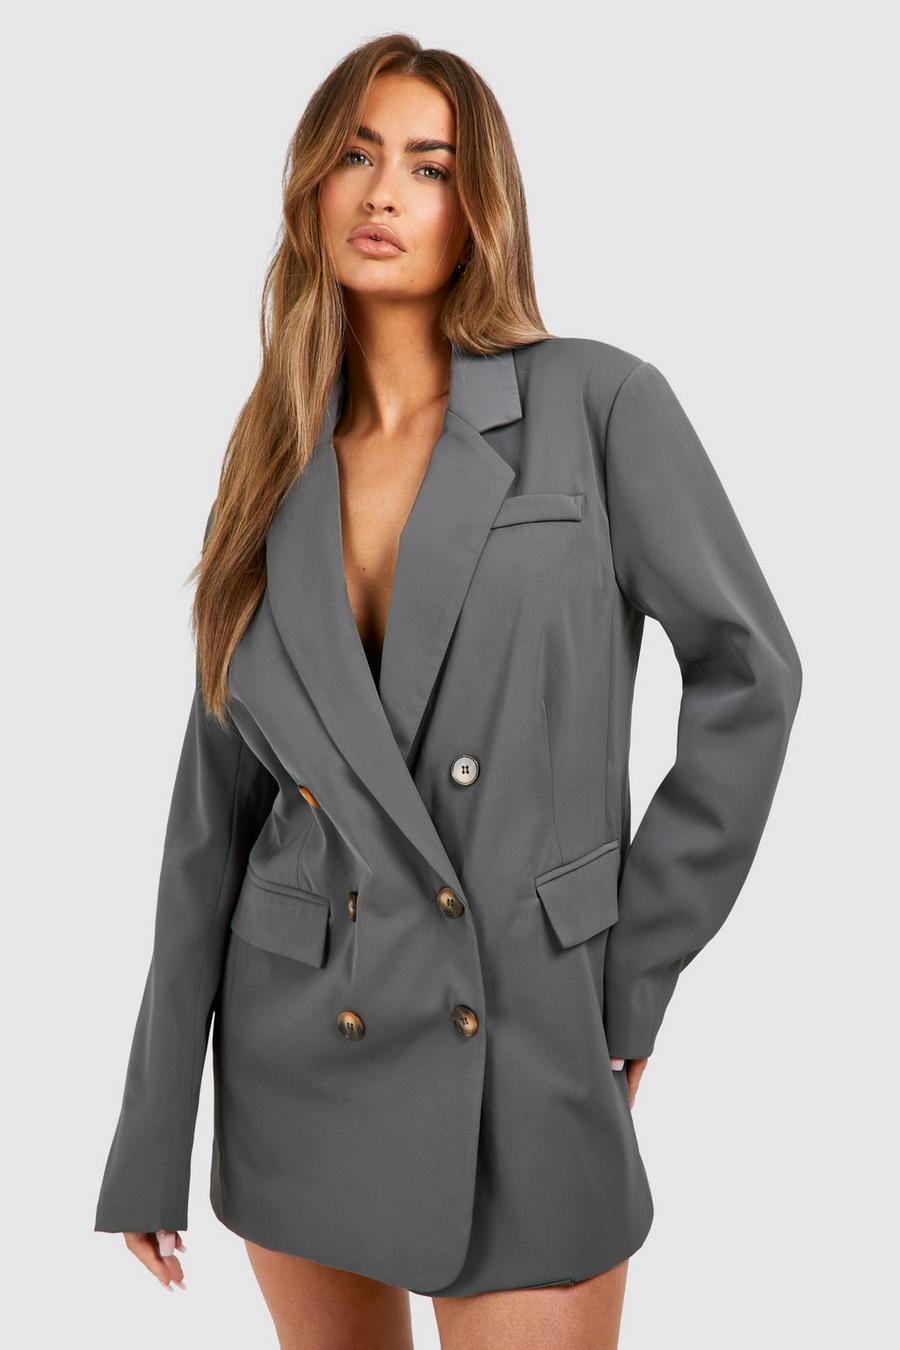 Charcoal Double Breasted Mansy Blazer Dress